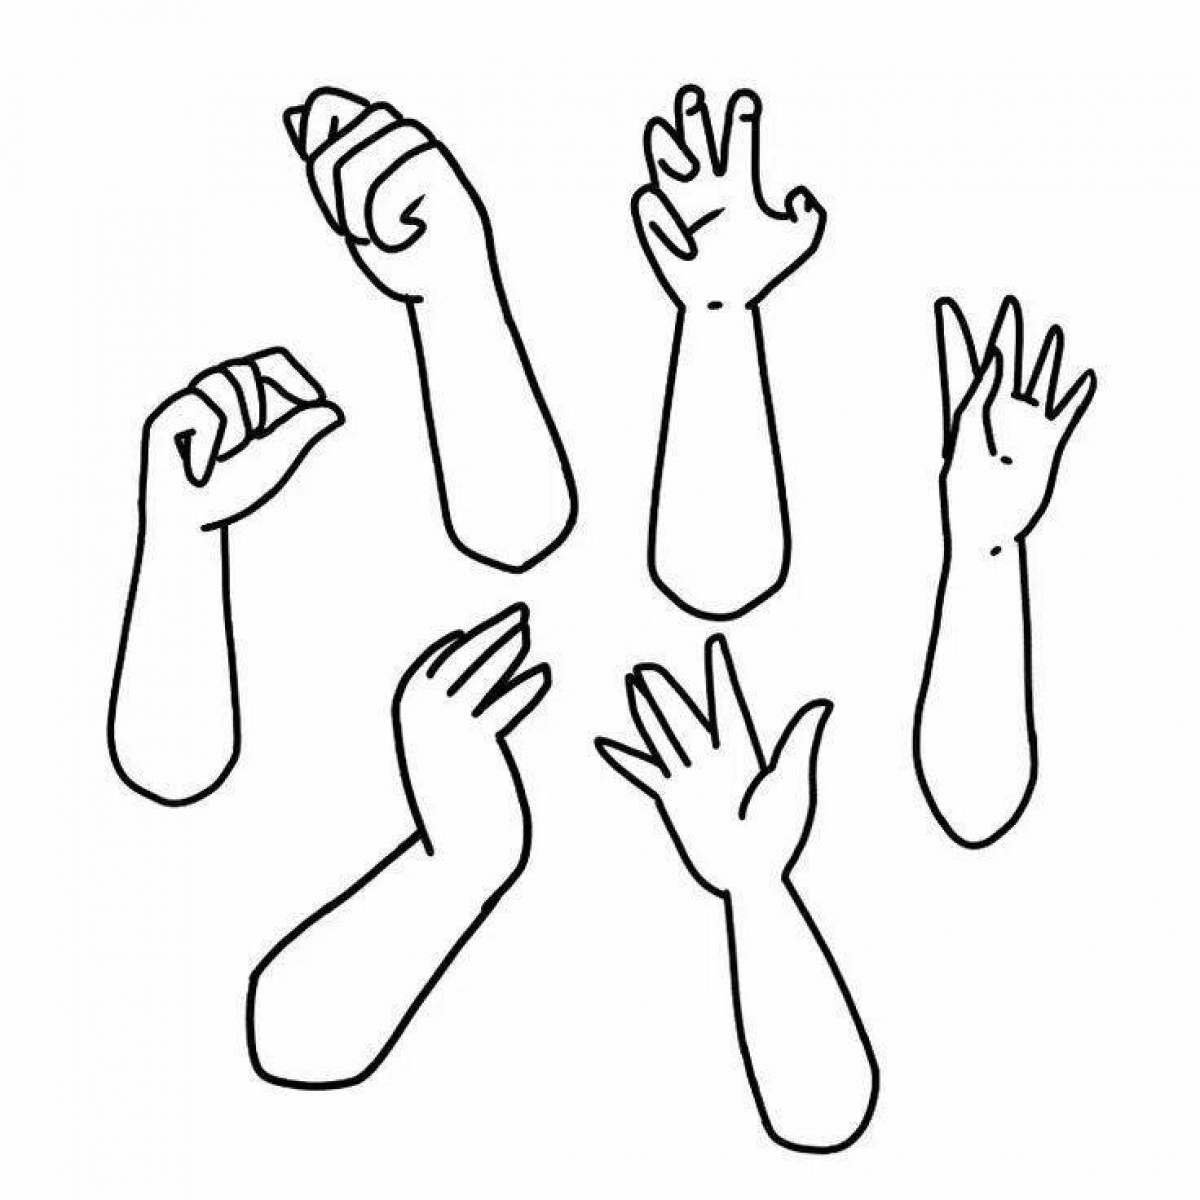 Color-filled hand thing wednesday coloring page